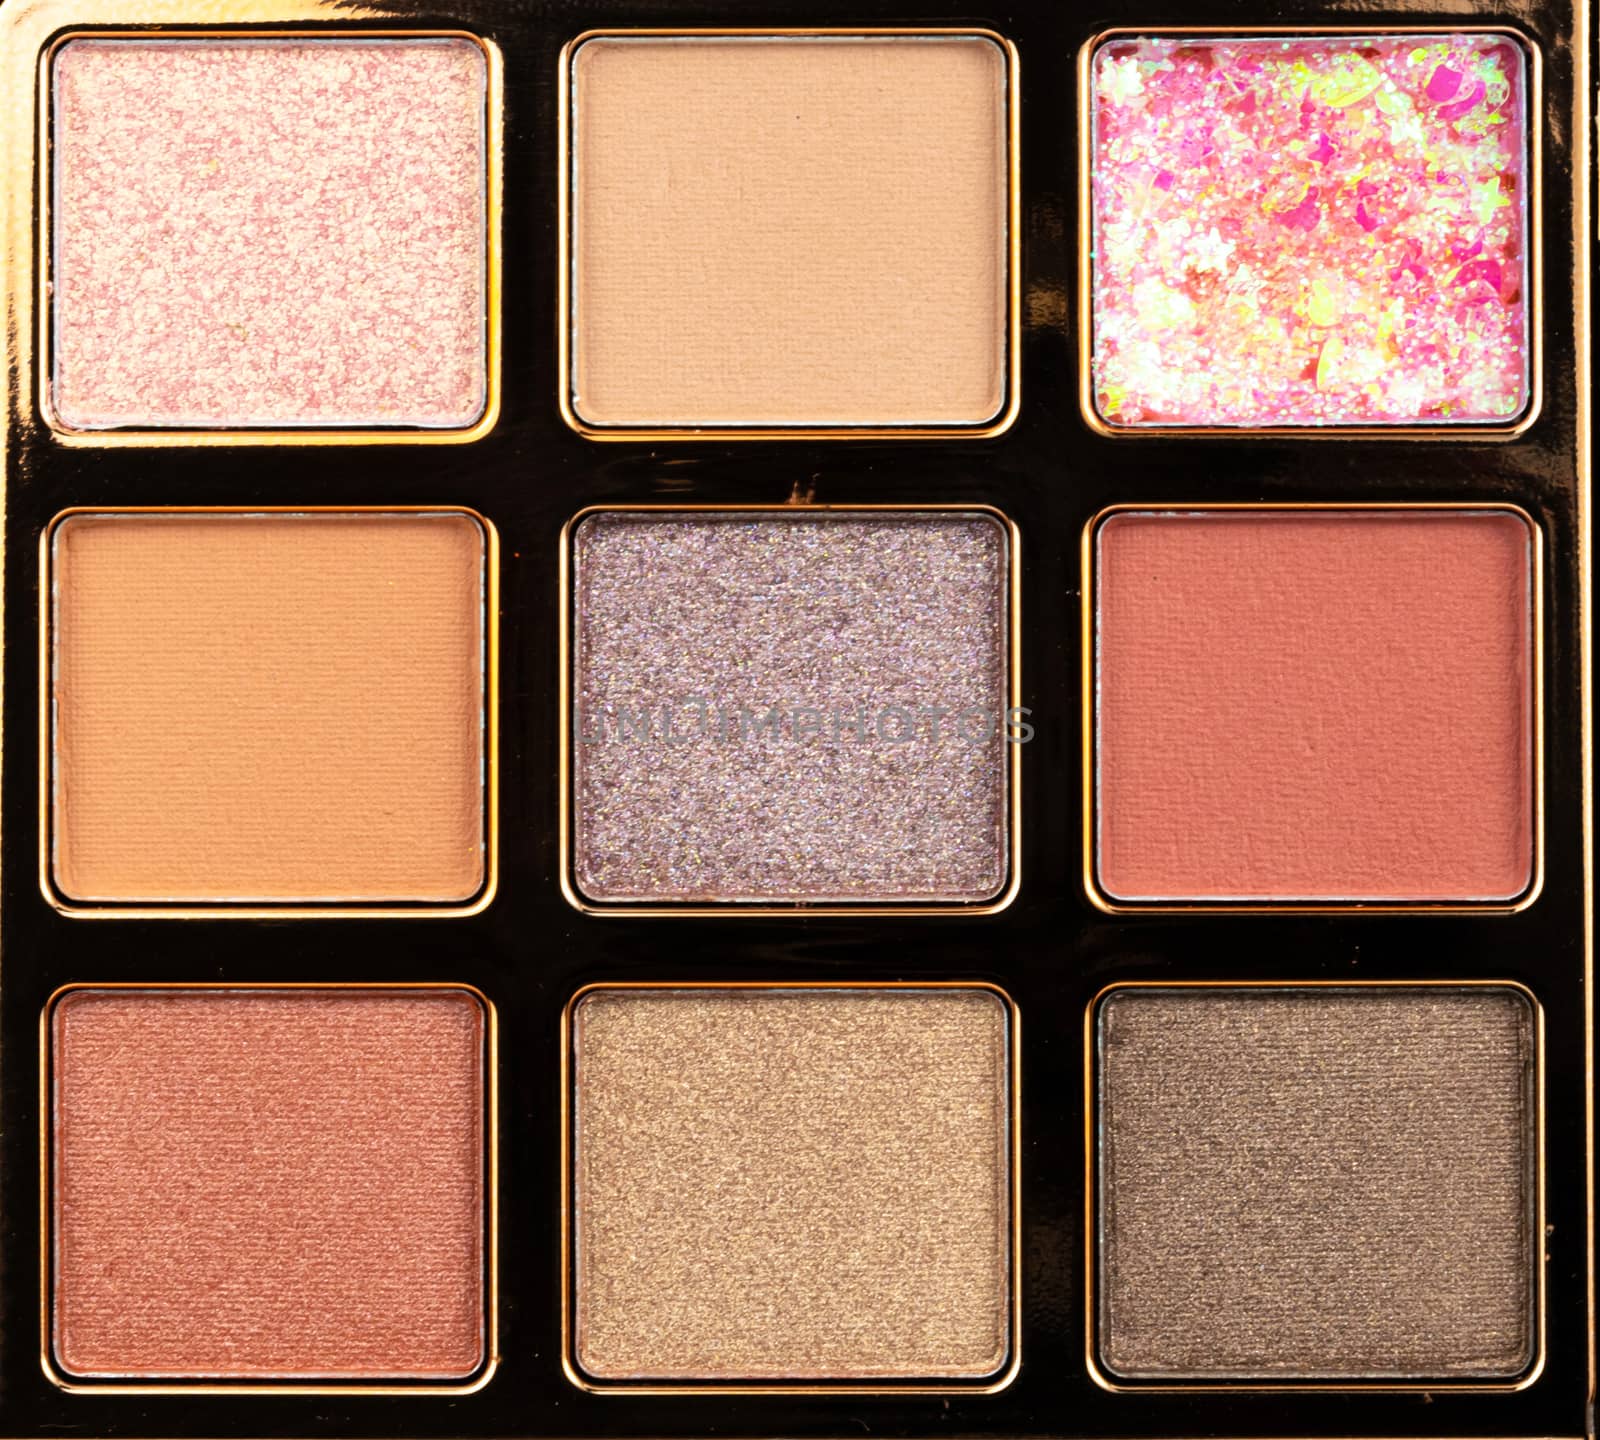 Palette of eyeshadows in Many colors tones